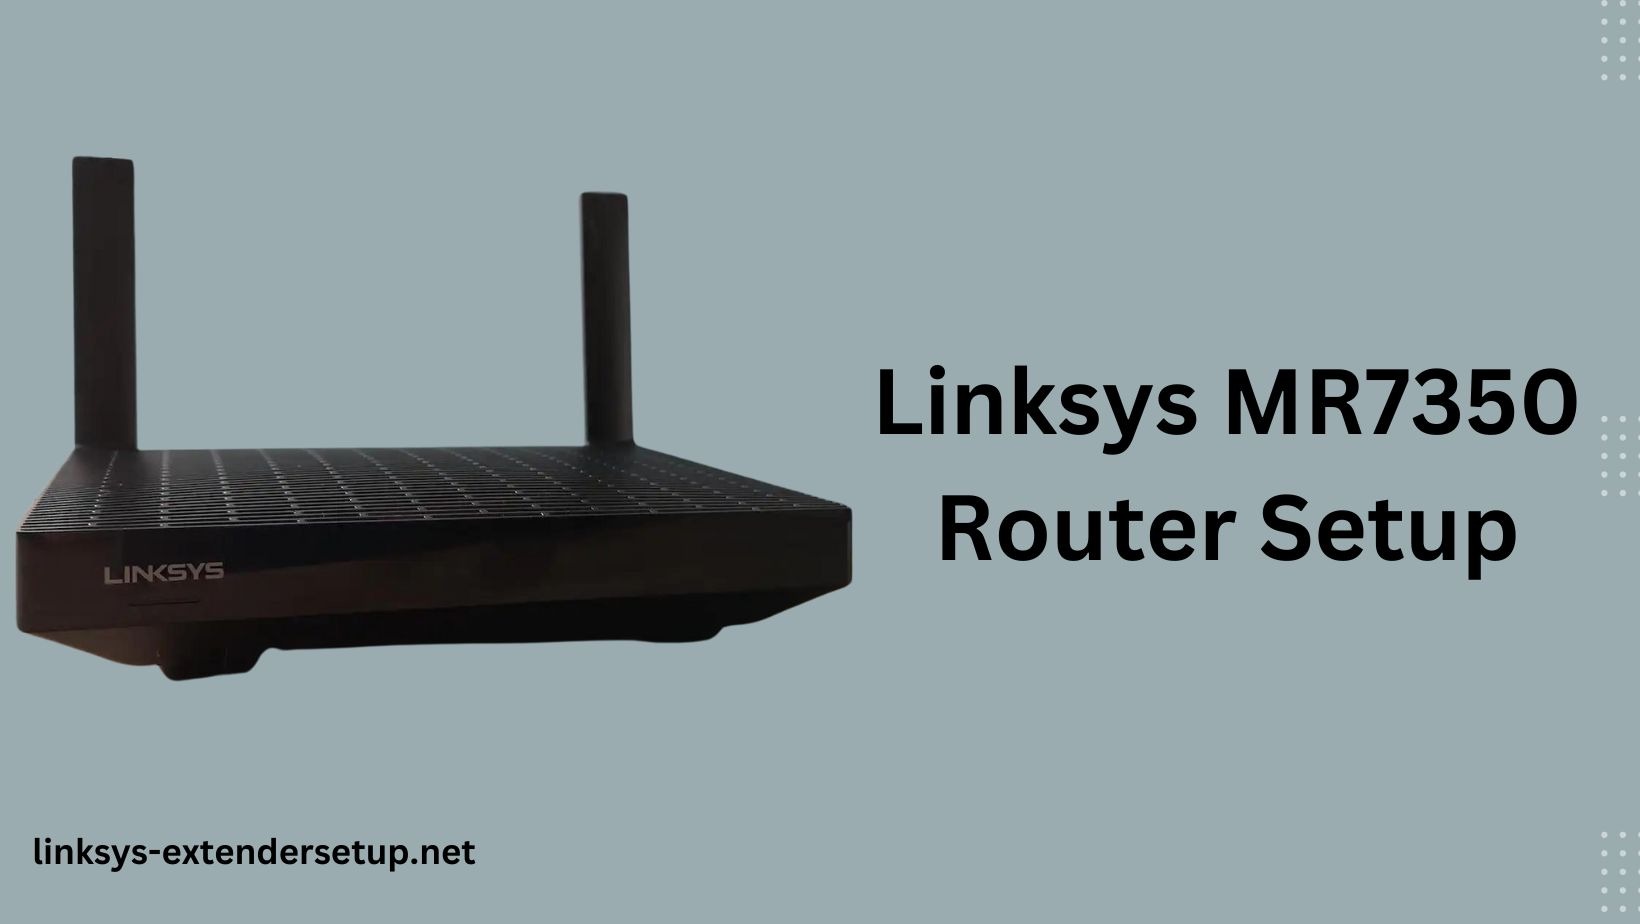 You are currently viewing A Step-by-Step guide for Linksys MR7350 Router Setup